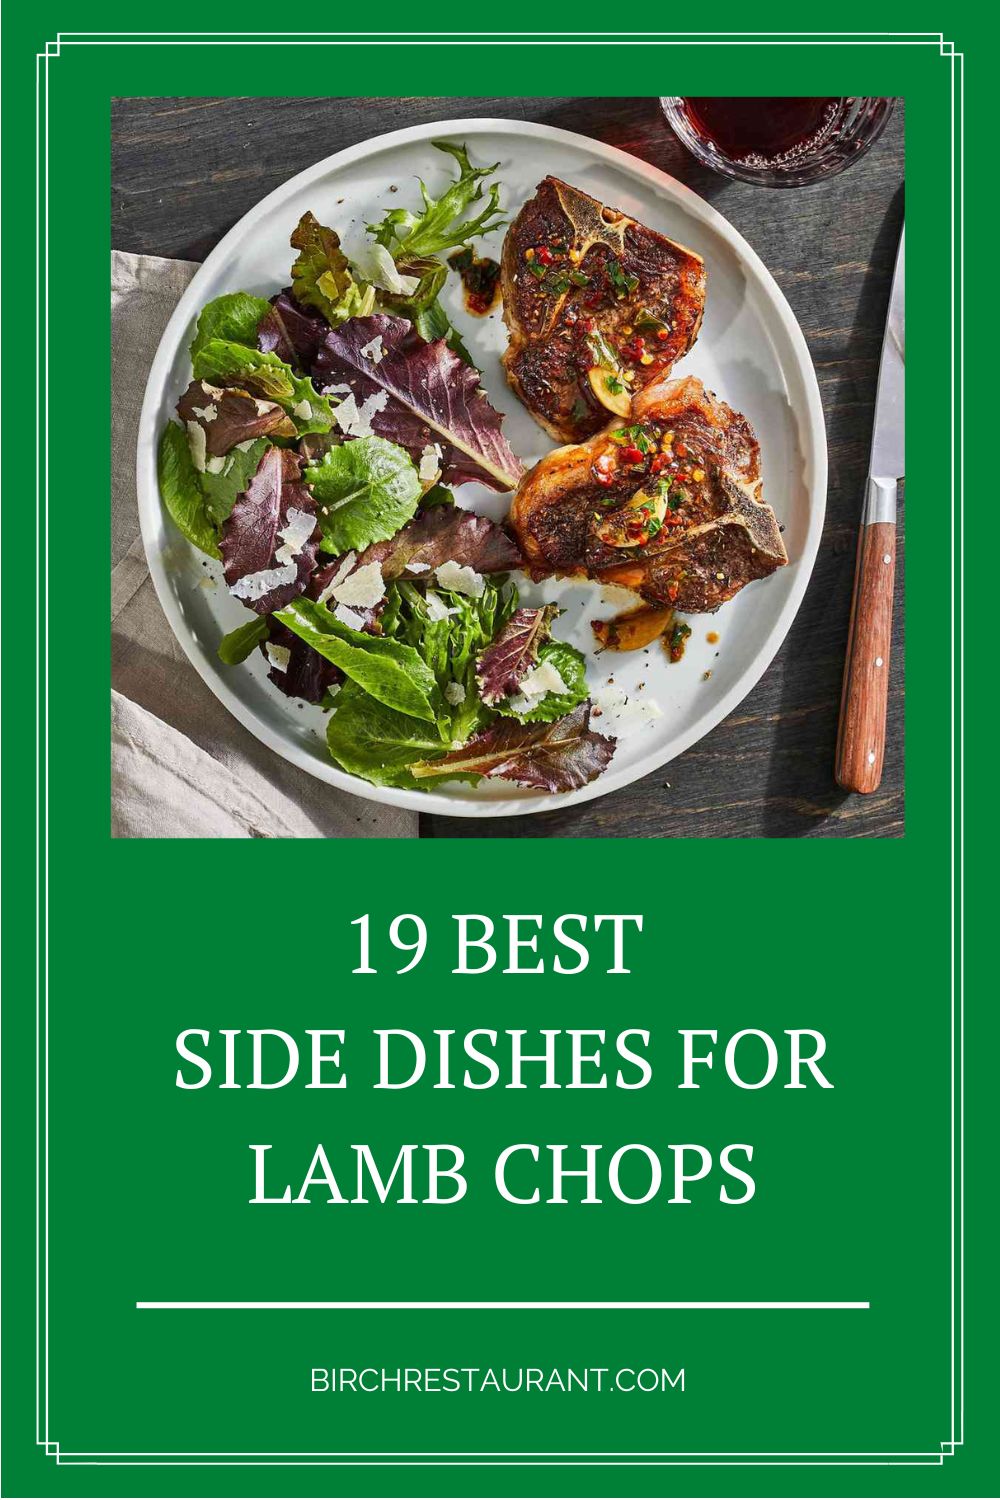 Best Side Dishes for Lamb Chops